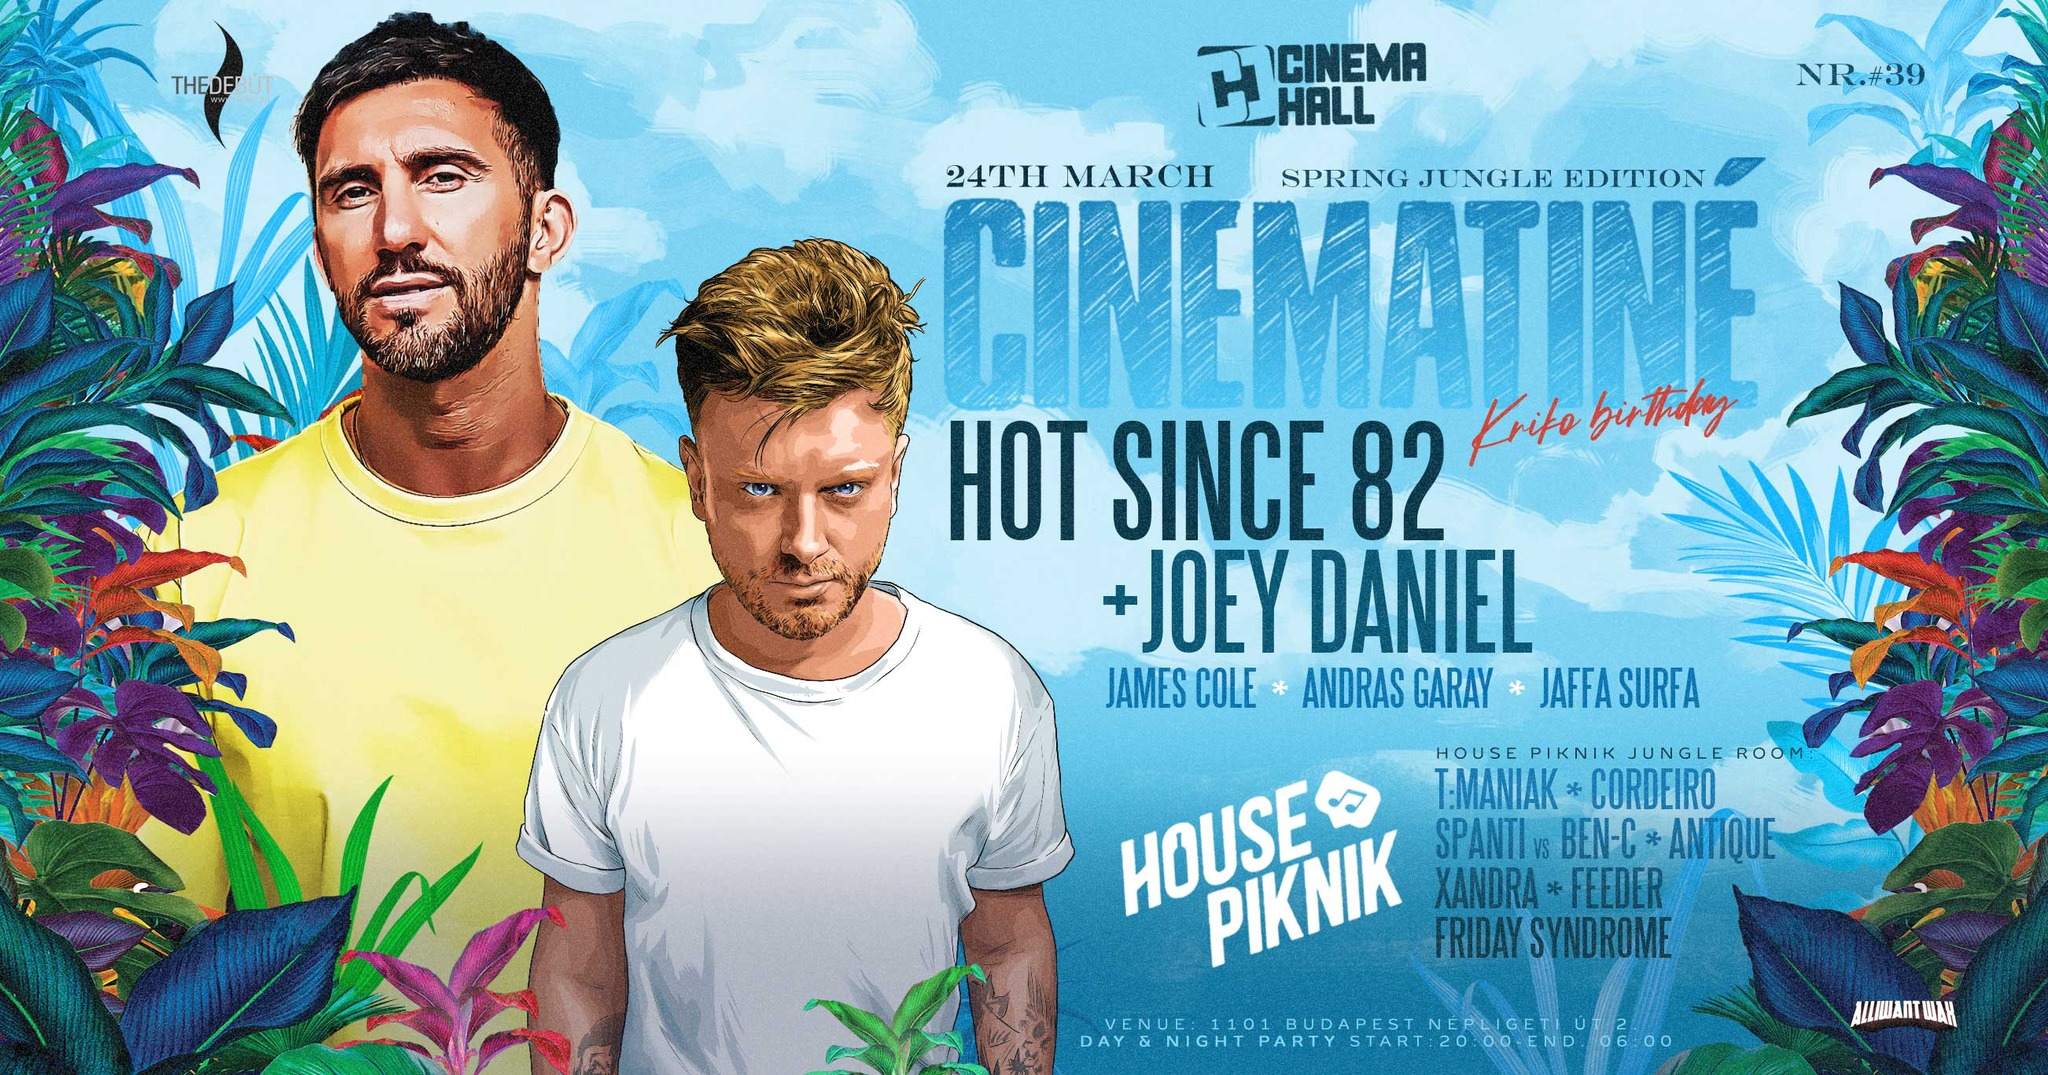 Hot Since 82 ★ Joey Daniel // Cinematiné & House Piknik Spring Jungle Edition - フライヤー表